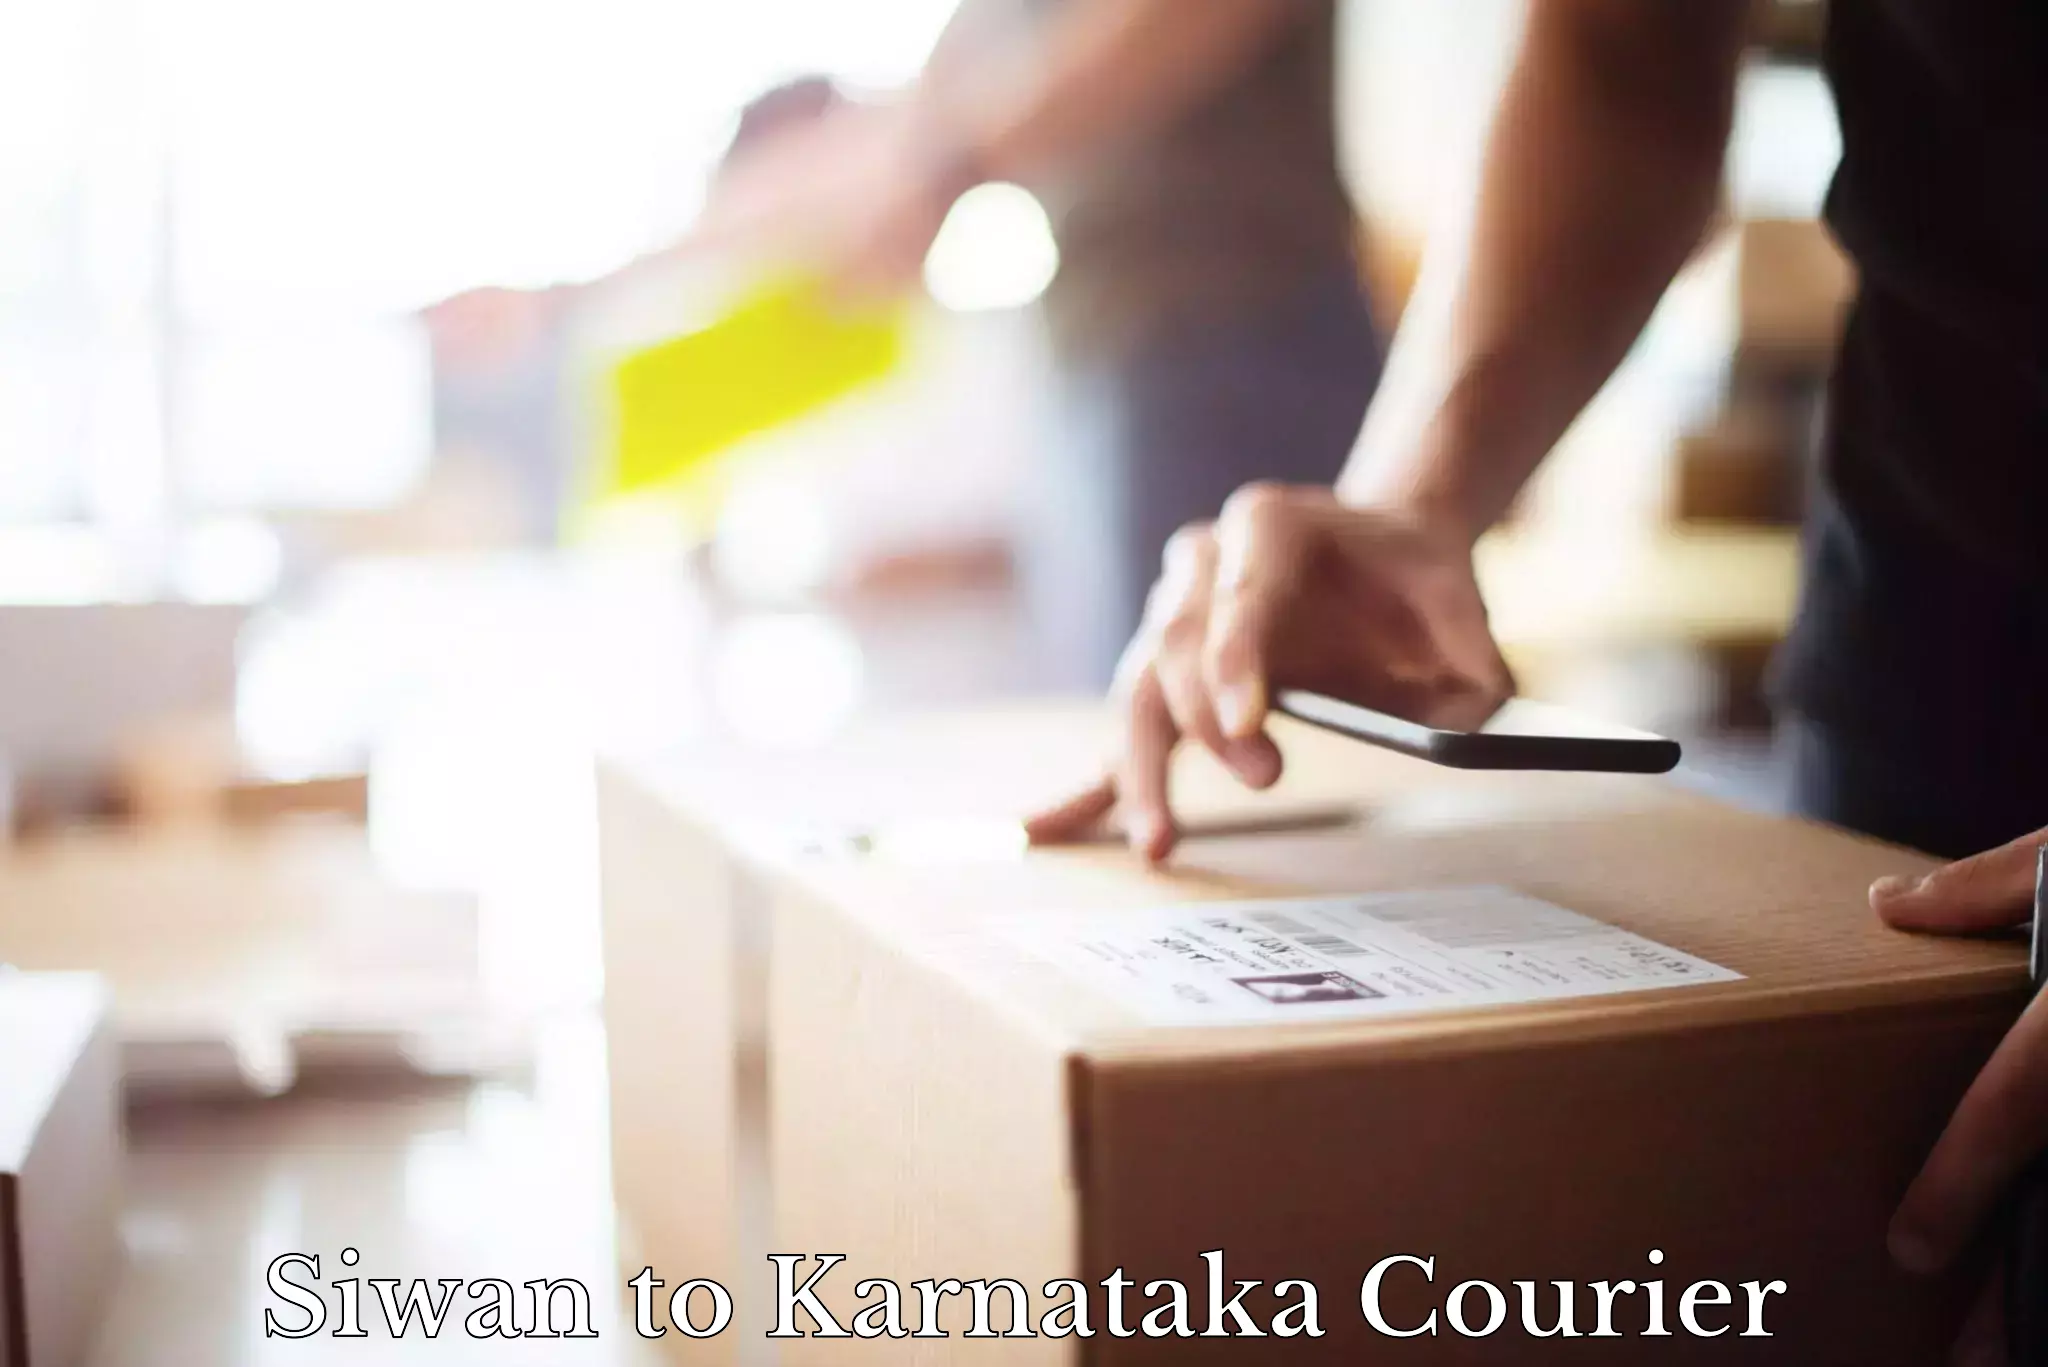 Overnight delivery services Siwan to Karnataka